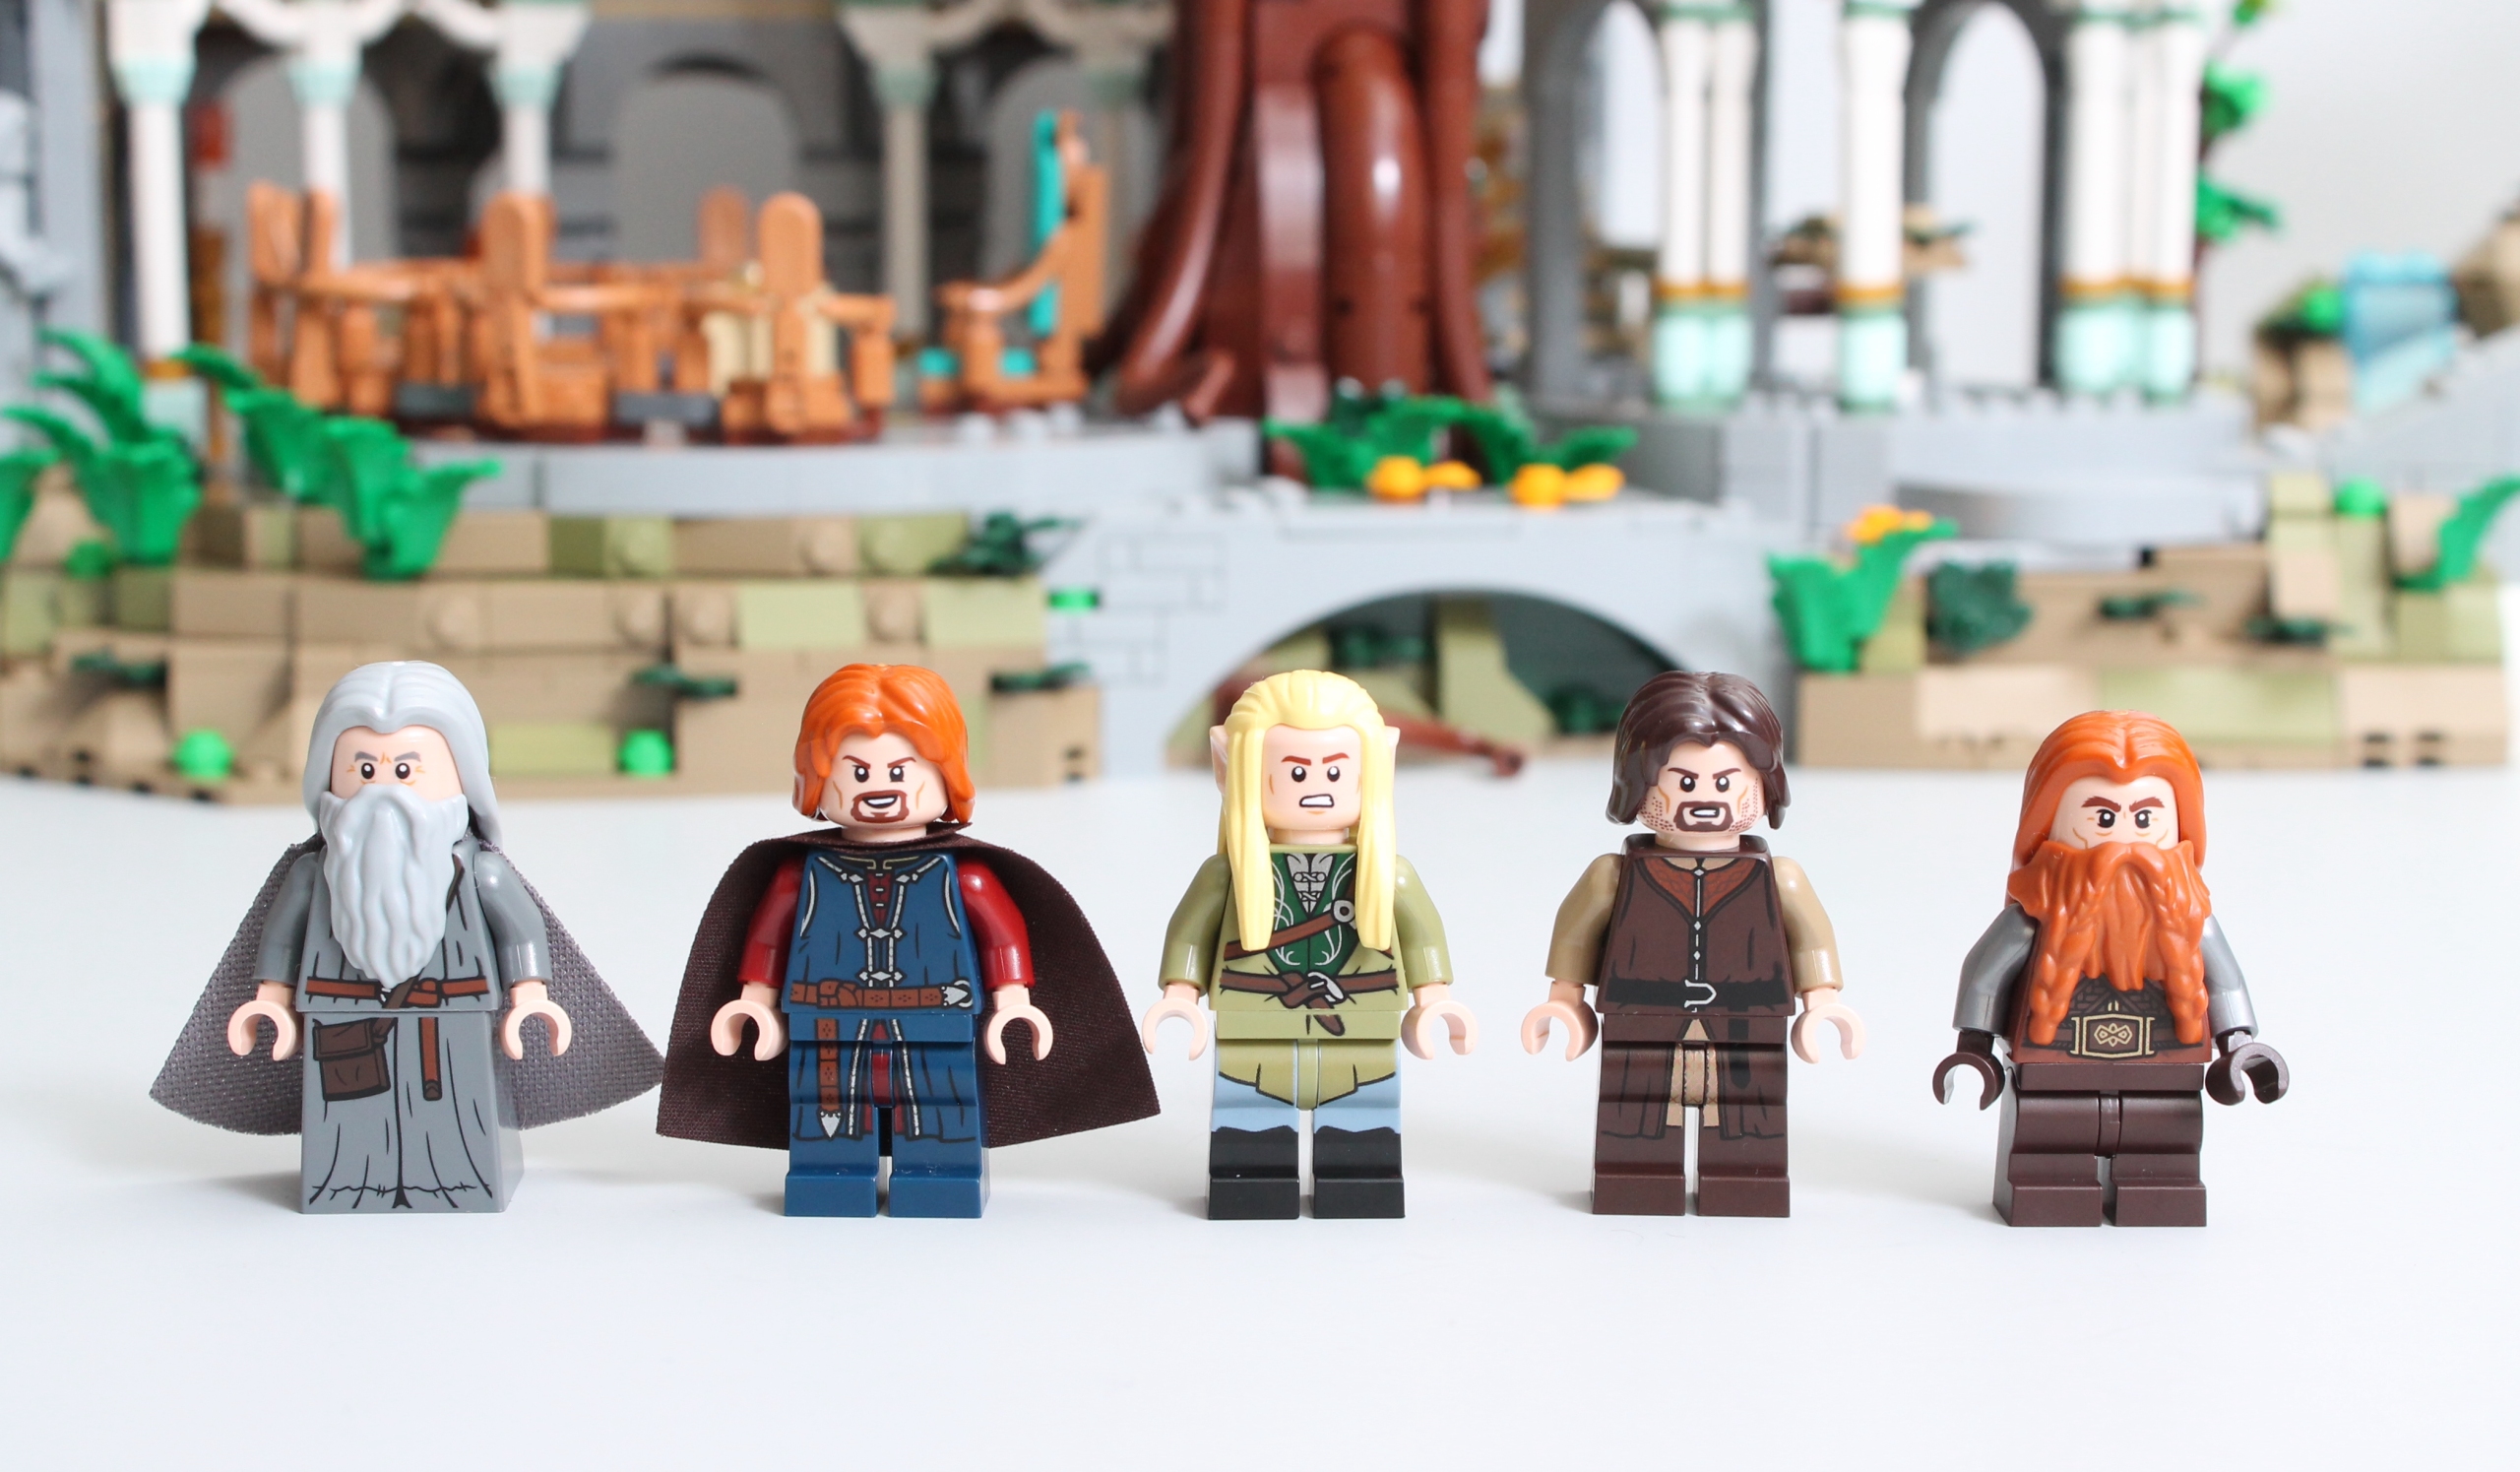 LEGO Lord of The Rings Rivendell REVIEW